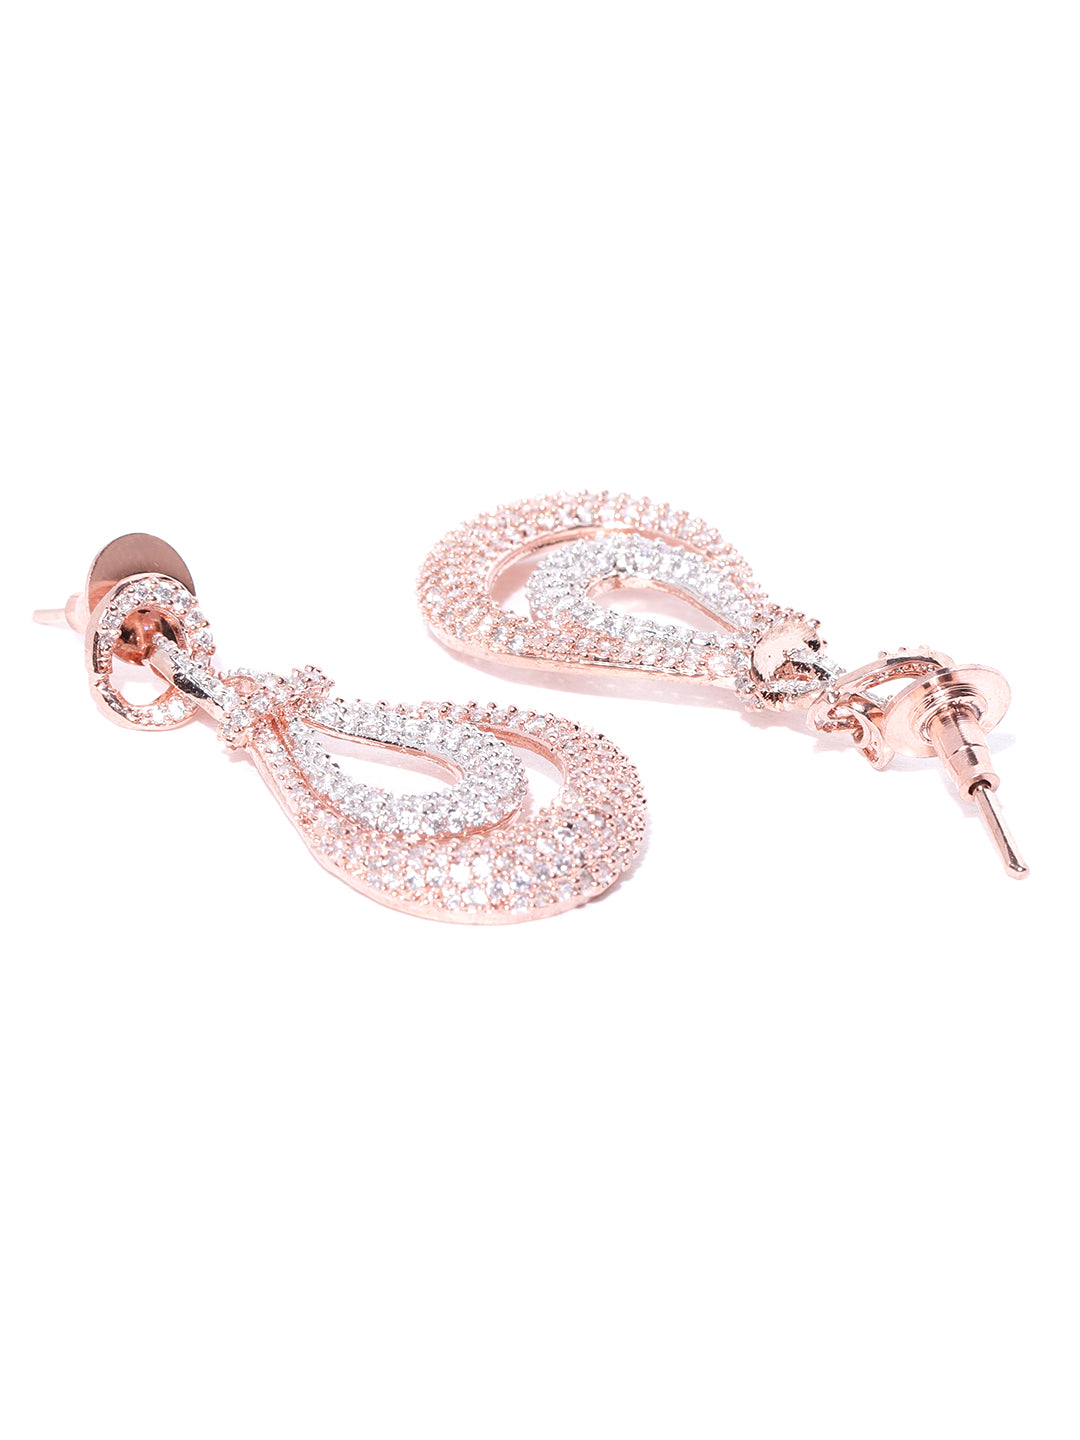 Rose Gold Beads Drop Earrings By Estonished | M164-SP23-26 | Cilory.com